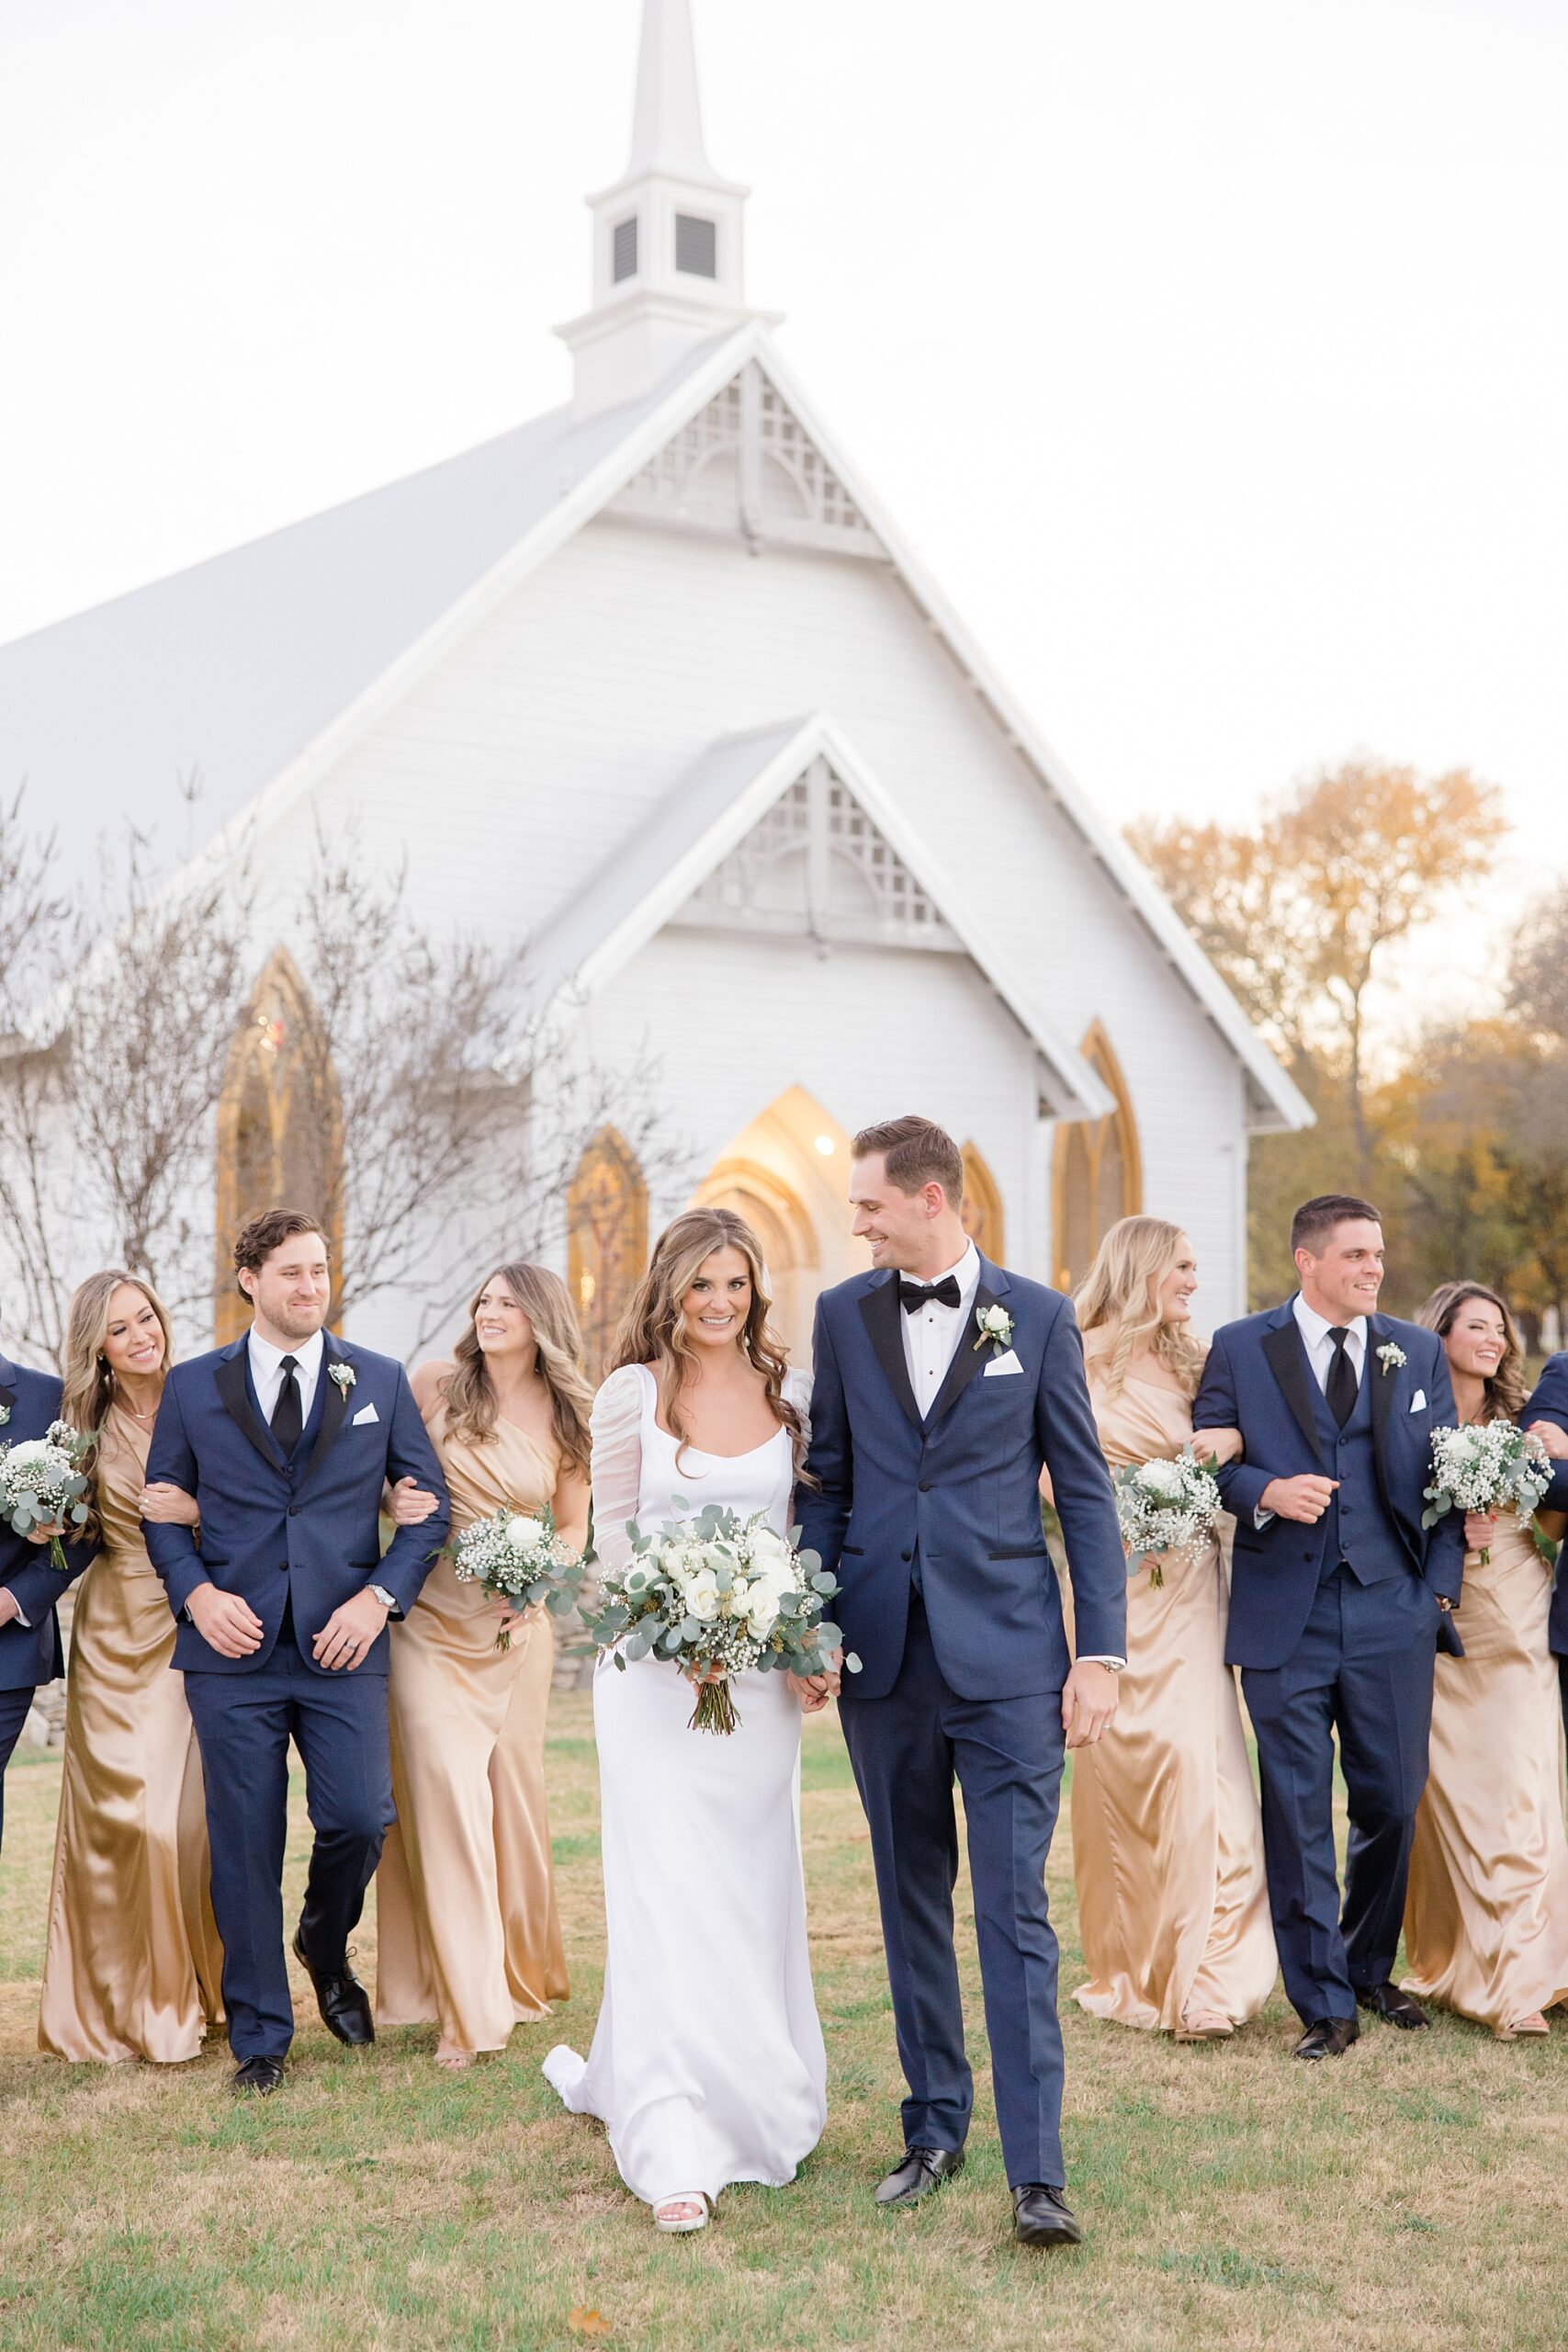 newlyweds walk in front of white chapel with wedding party behind them 